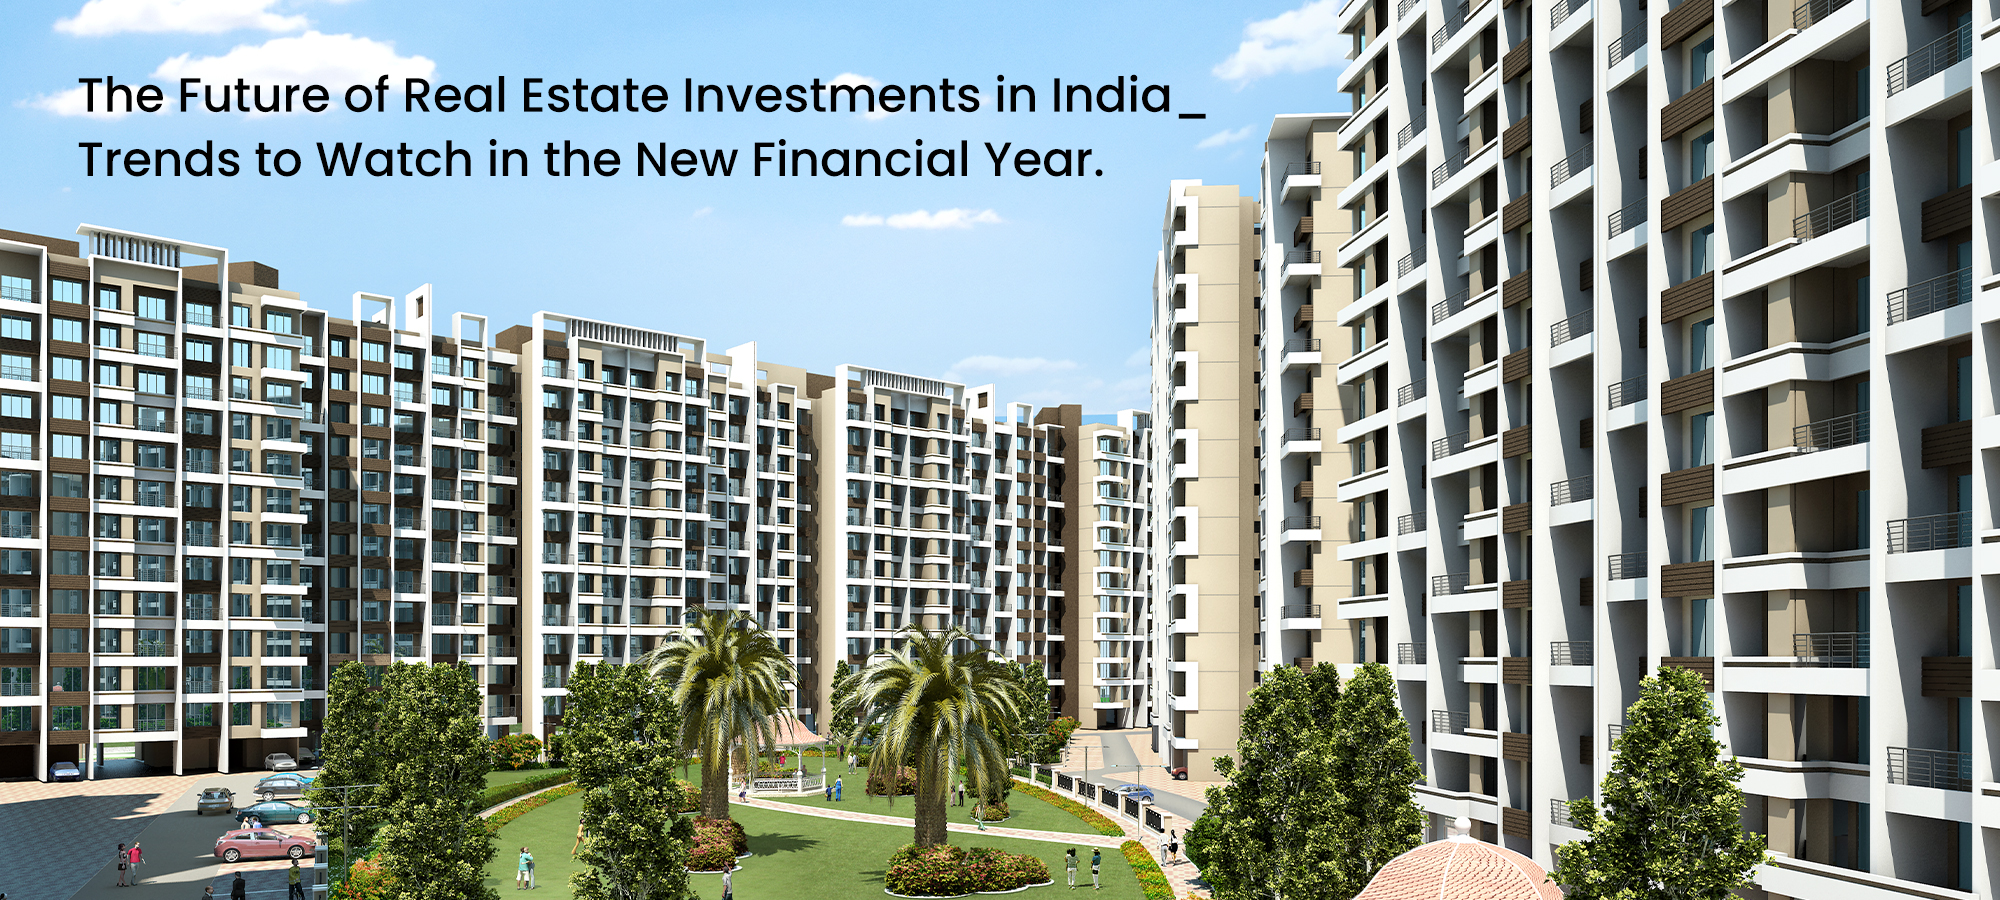 The Future of Real Estate Investments in India: Trends to Watch in the New Financial Year.